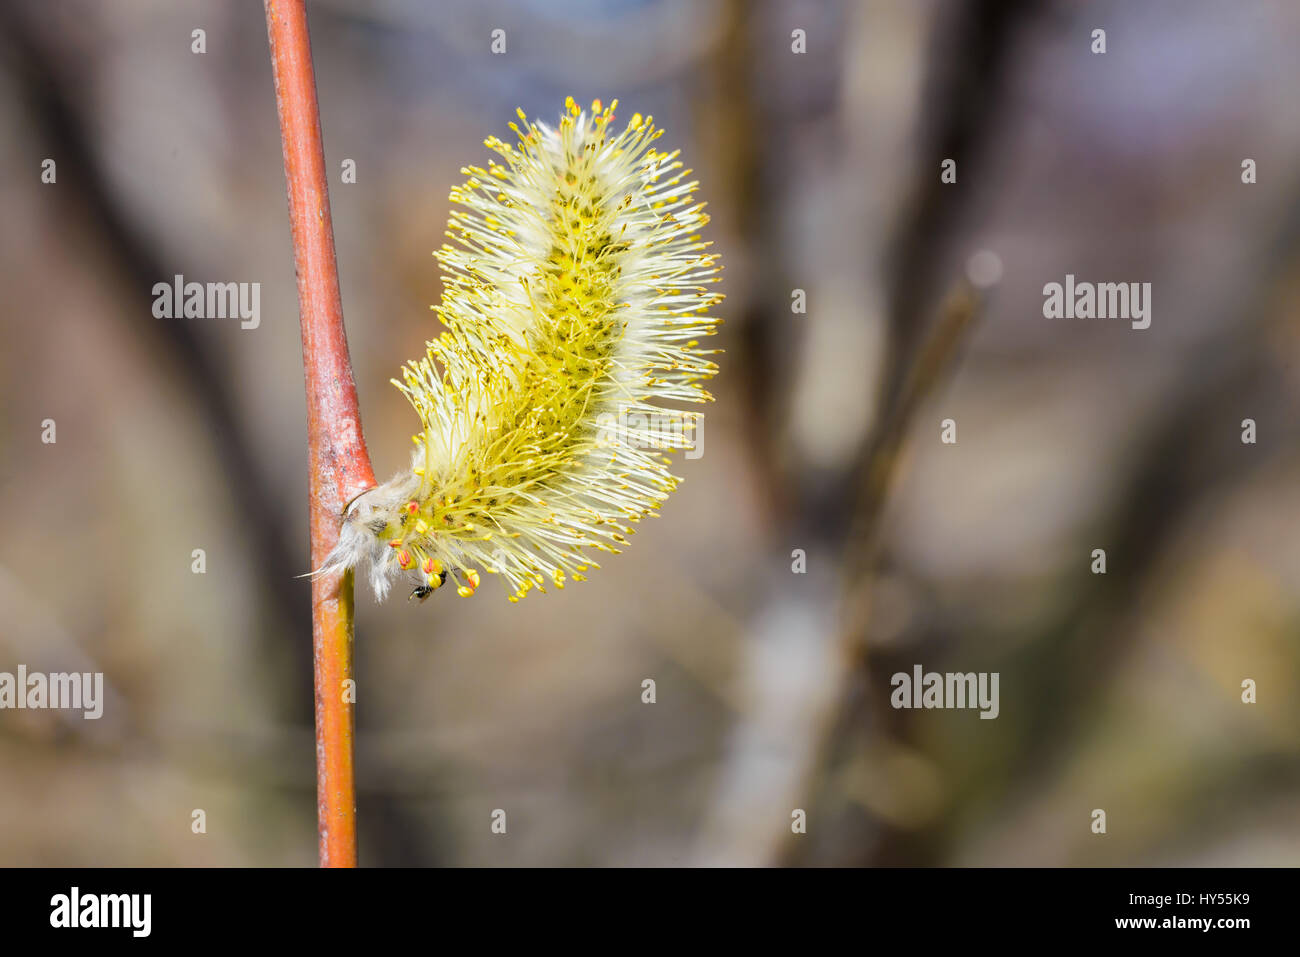 Male catkin willow flower on a tree branch in spring Stock Photo